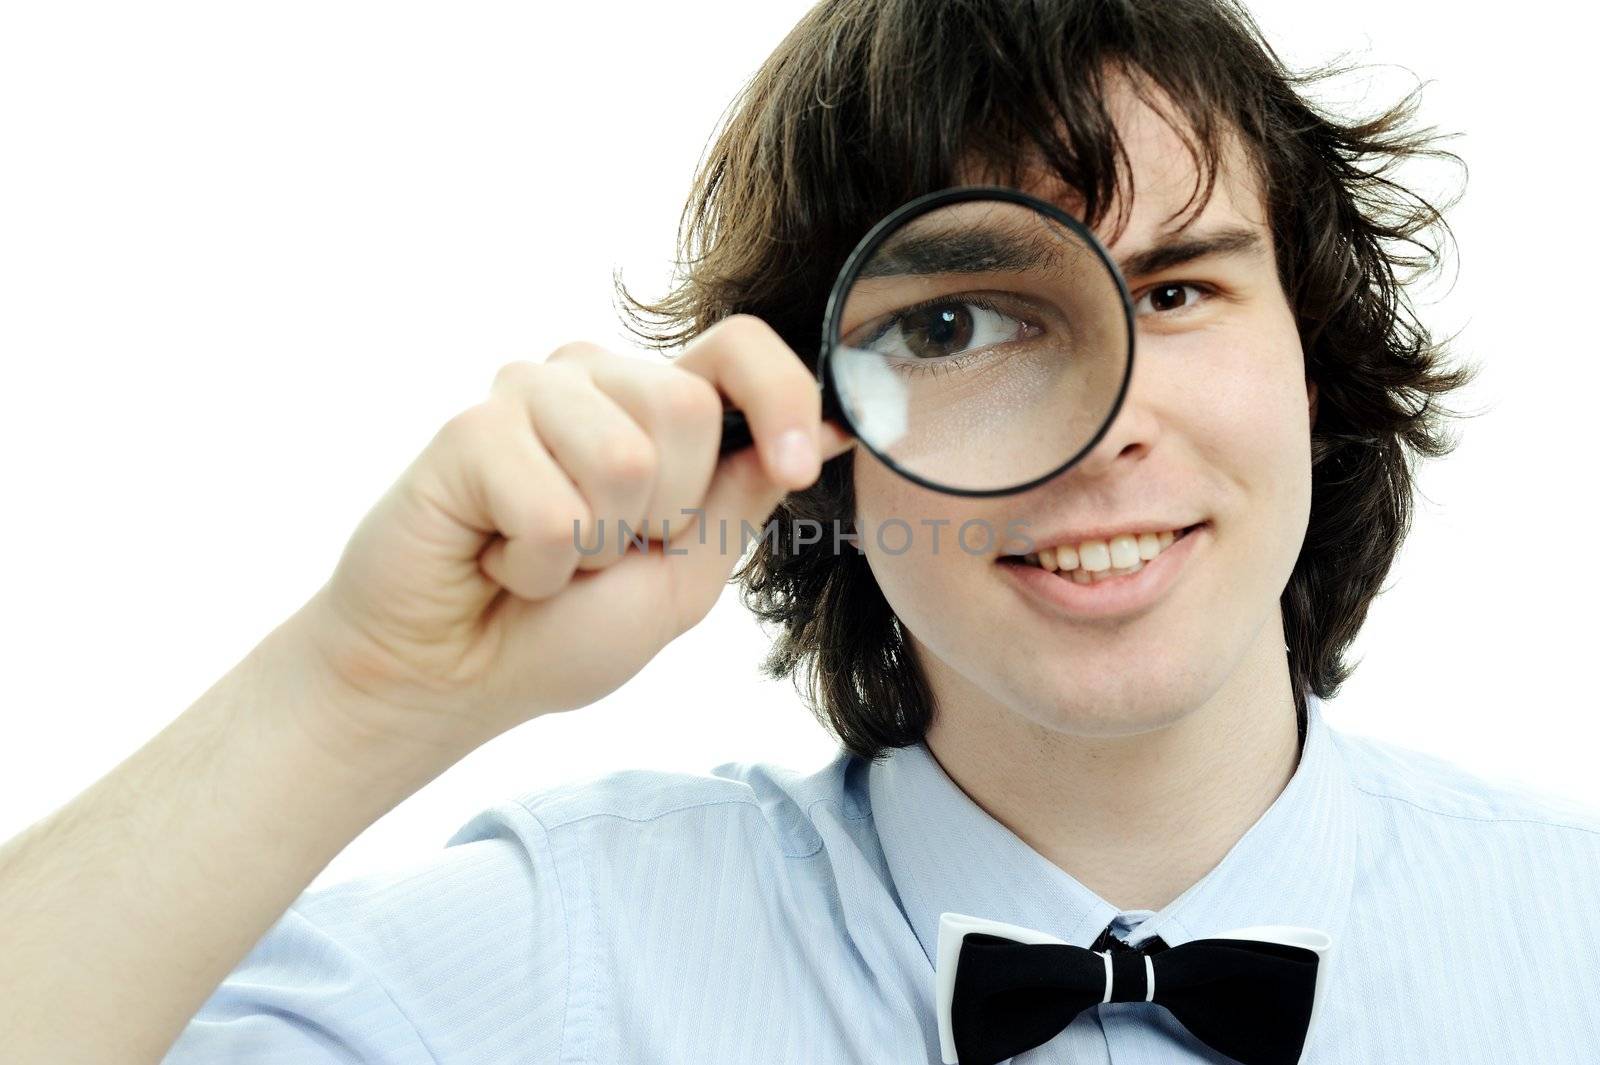 An image of a young man with a magnifier